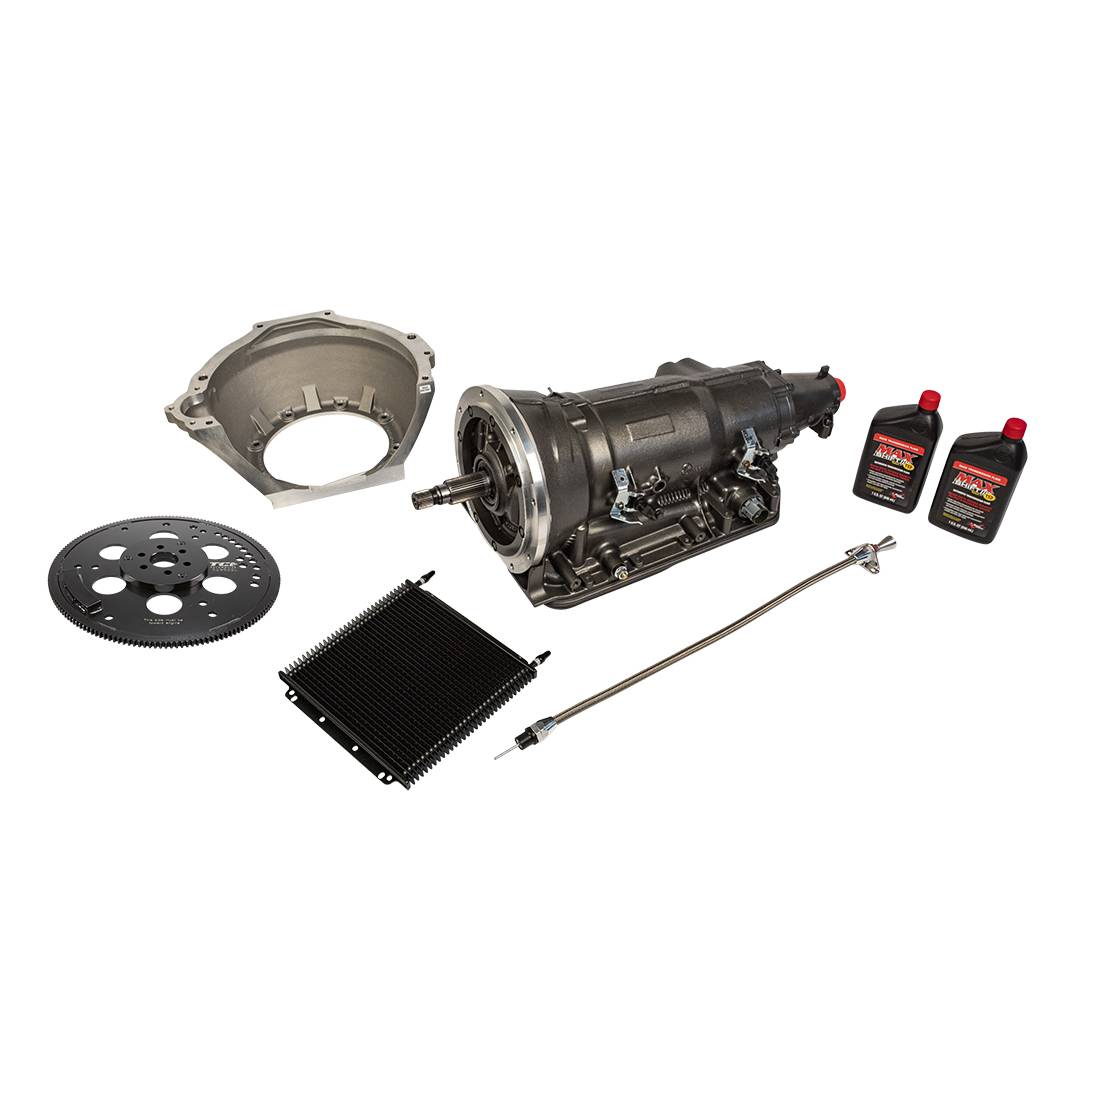 4x Four Speed Transmission Package for 50oz Externally Balanced Small Block Ford, Electronic 4L80E-Based